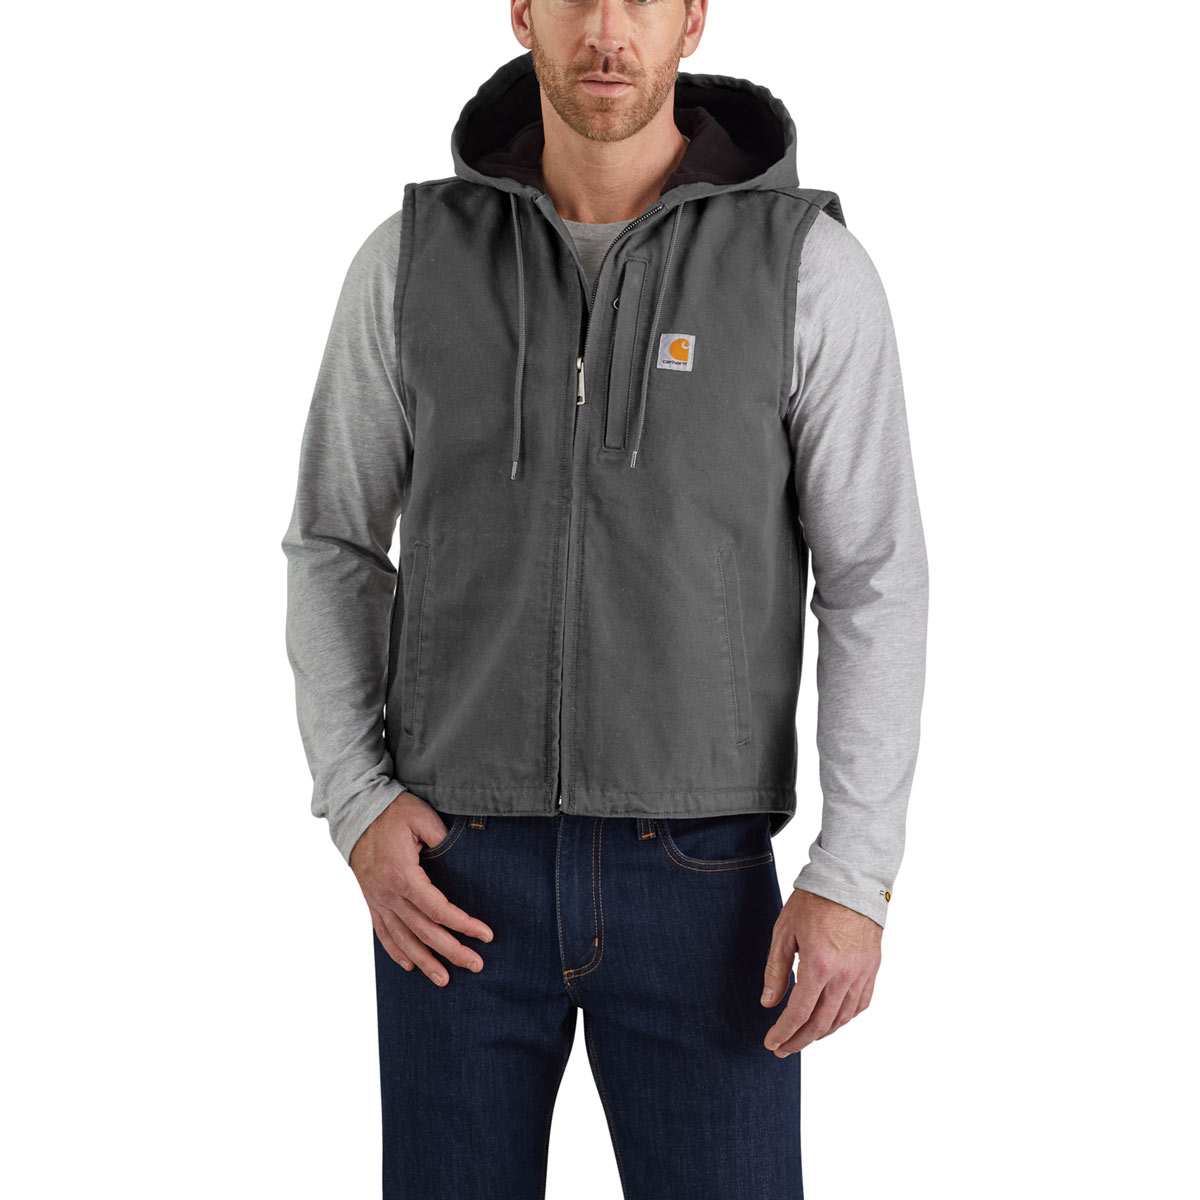 Carhartt Washed Duck Knoxville Weste mit Kapuze - 2